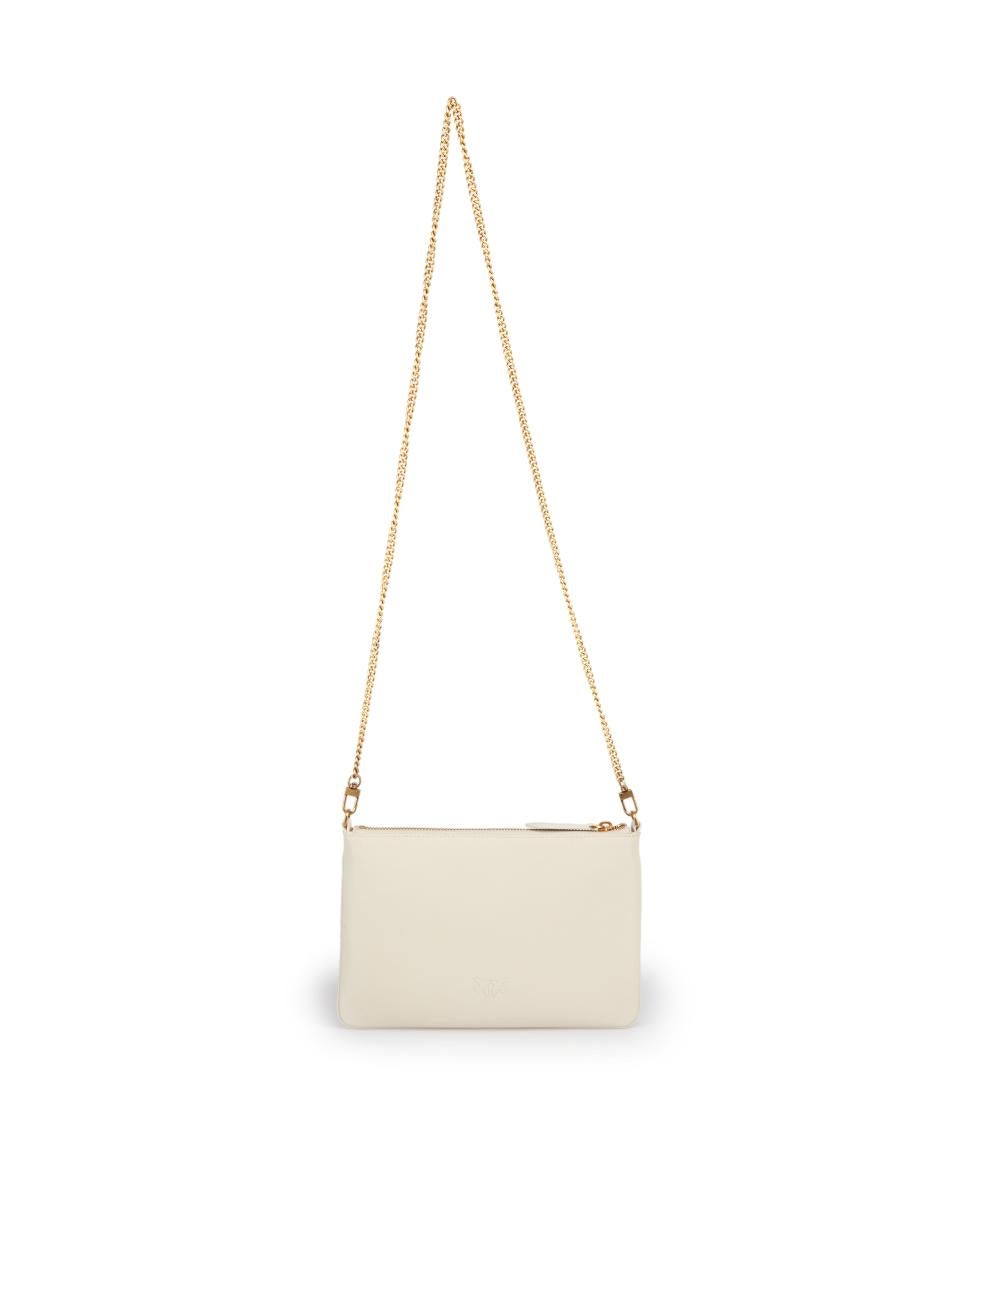 Pinko White Leather Classic Flat Love Bag Simply In New Condition For Sale In London, GB